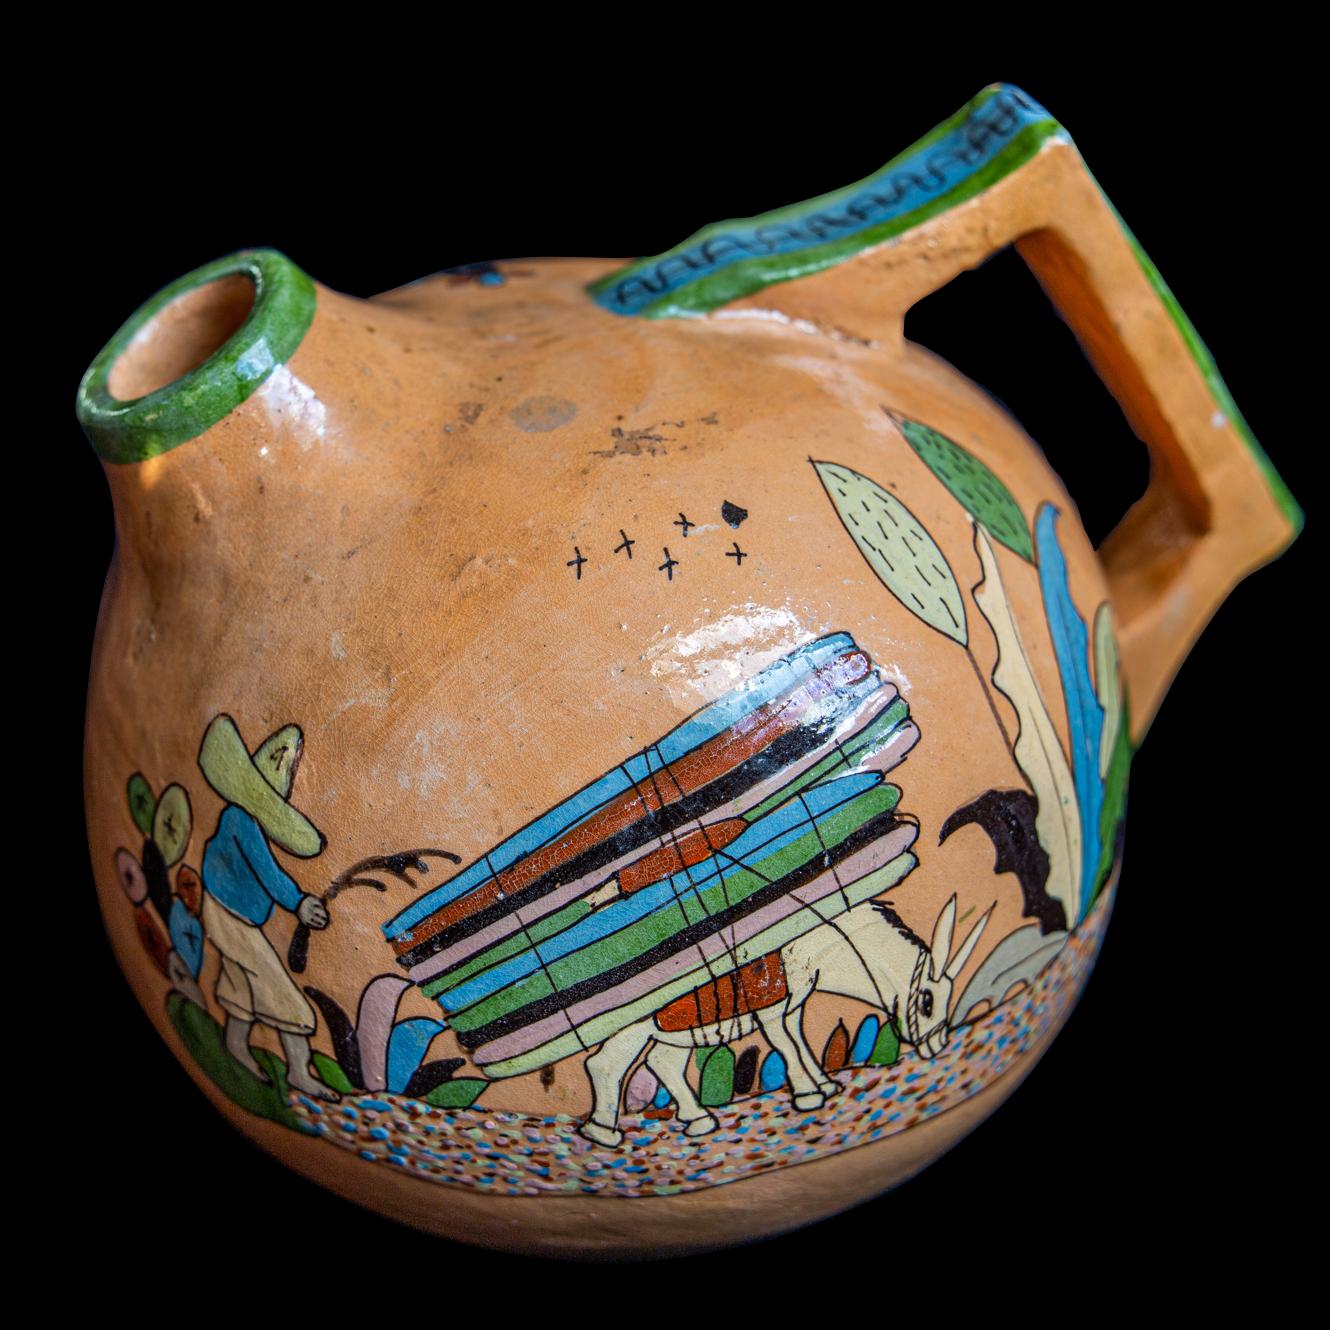 A wonderfully decorative earthenware jug from the Tonala valley, depicting a ‘Tlaquepaque’ scene with the most beautiful glazed artisanal composition. Graphic vivid colours depicting sleepy chaparral life, cacti and flora. In the 20s and 30s just